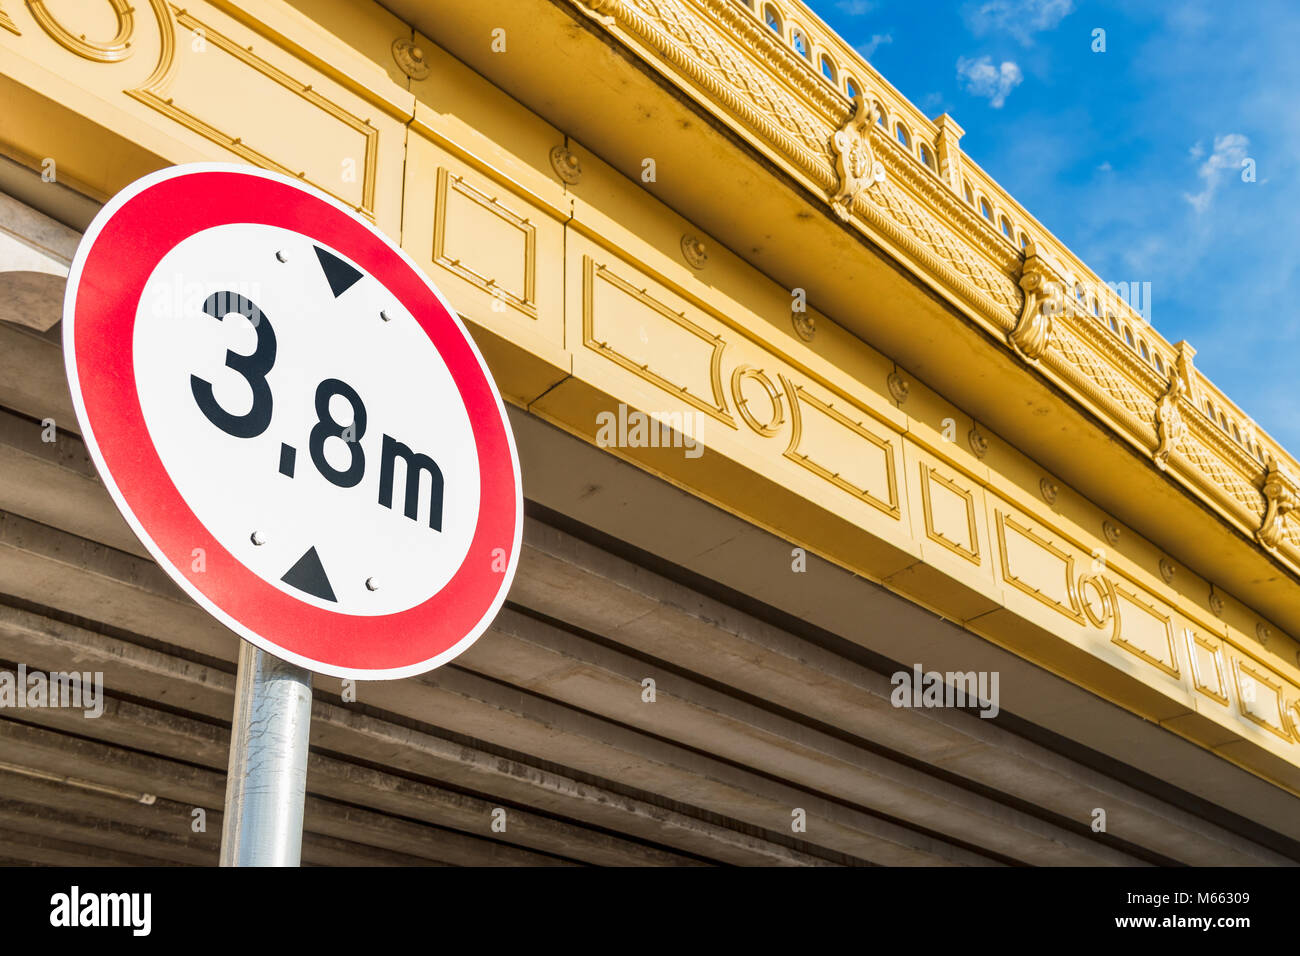 Circular low bridge regulatory road sign with red ring showing the height limit on non-arch yellow bridge against blue sky Stock Photo